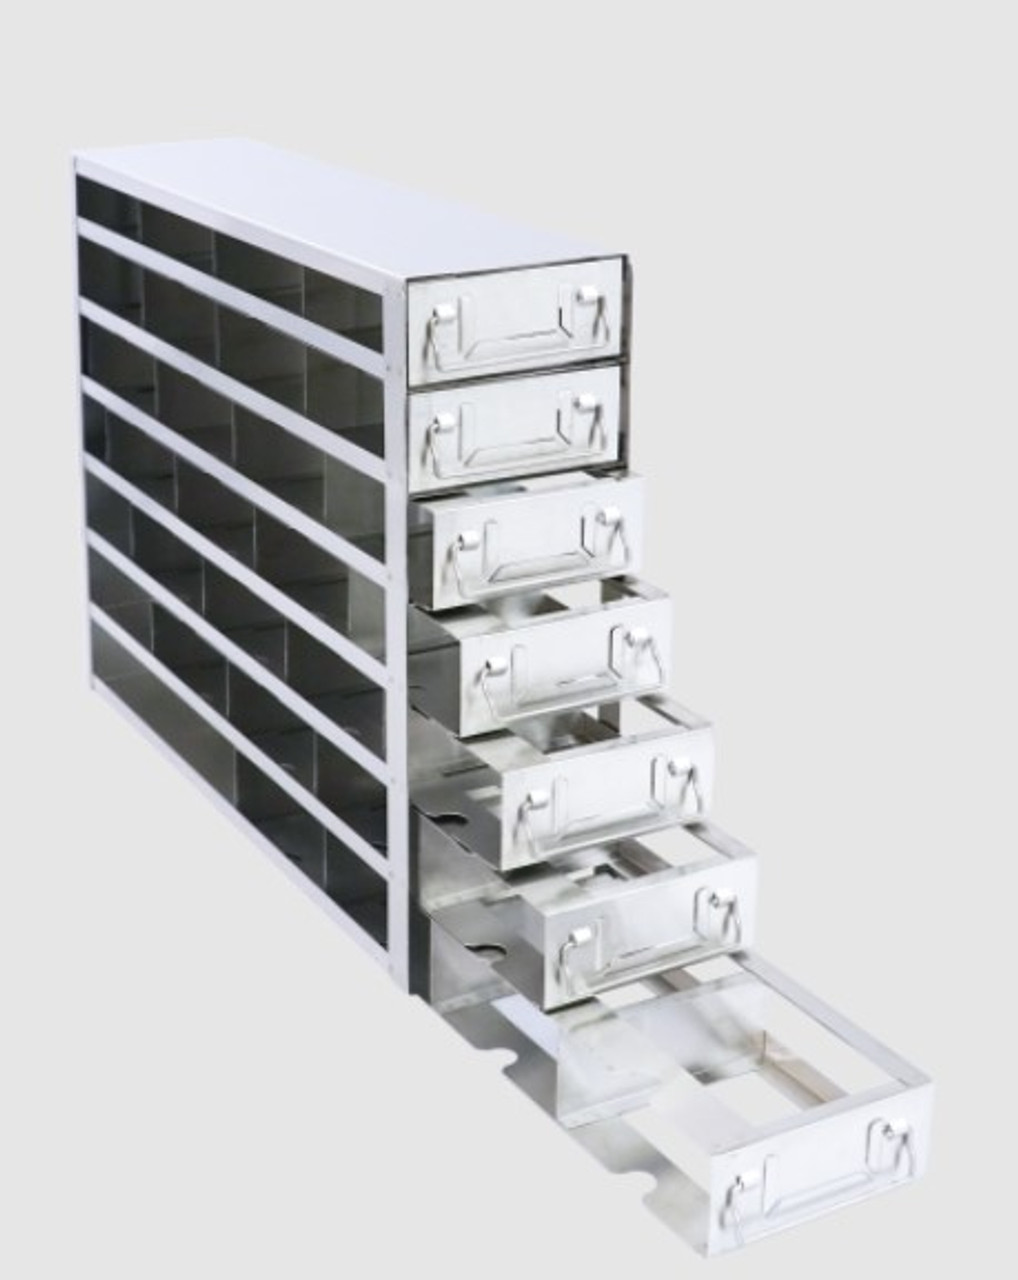 https://cdn11.bigcommerce.com/s-w9bdixgj/images/stencil/1280x1280/products/5047/10922/Stainless_Steel_Freezer_Drawer_Rack_for_28_Two_Inch_Cryoboxes_in_a_Seven_Tall_by_Four_Deep_Format_-_UFD-472-2_-_Lab_Freezer_Racks_-_Stellar_Scientific.png__88466.1650374143.jpg?c=2